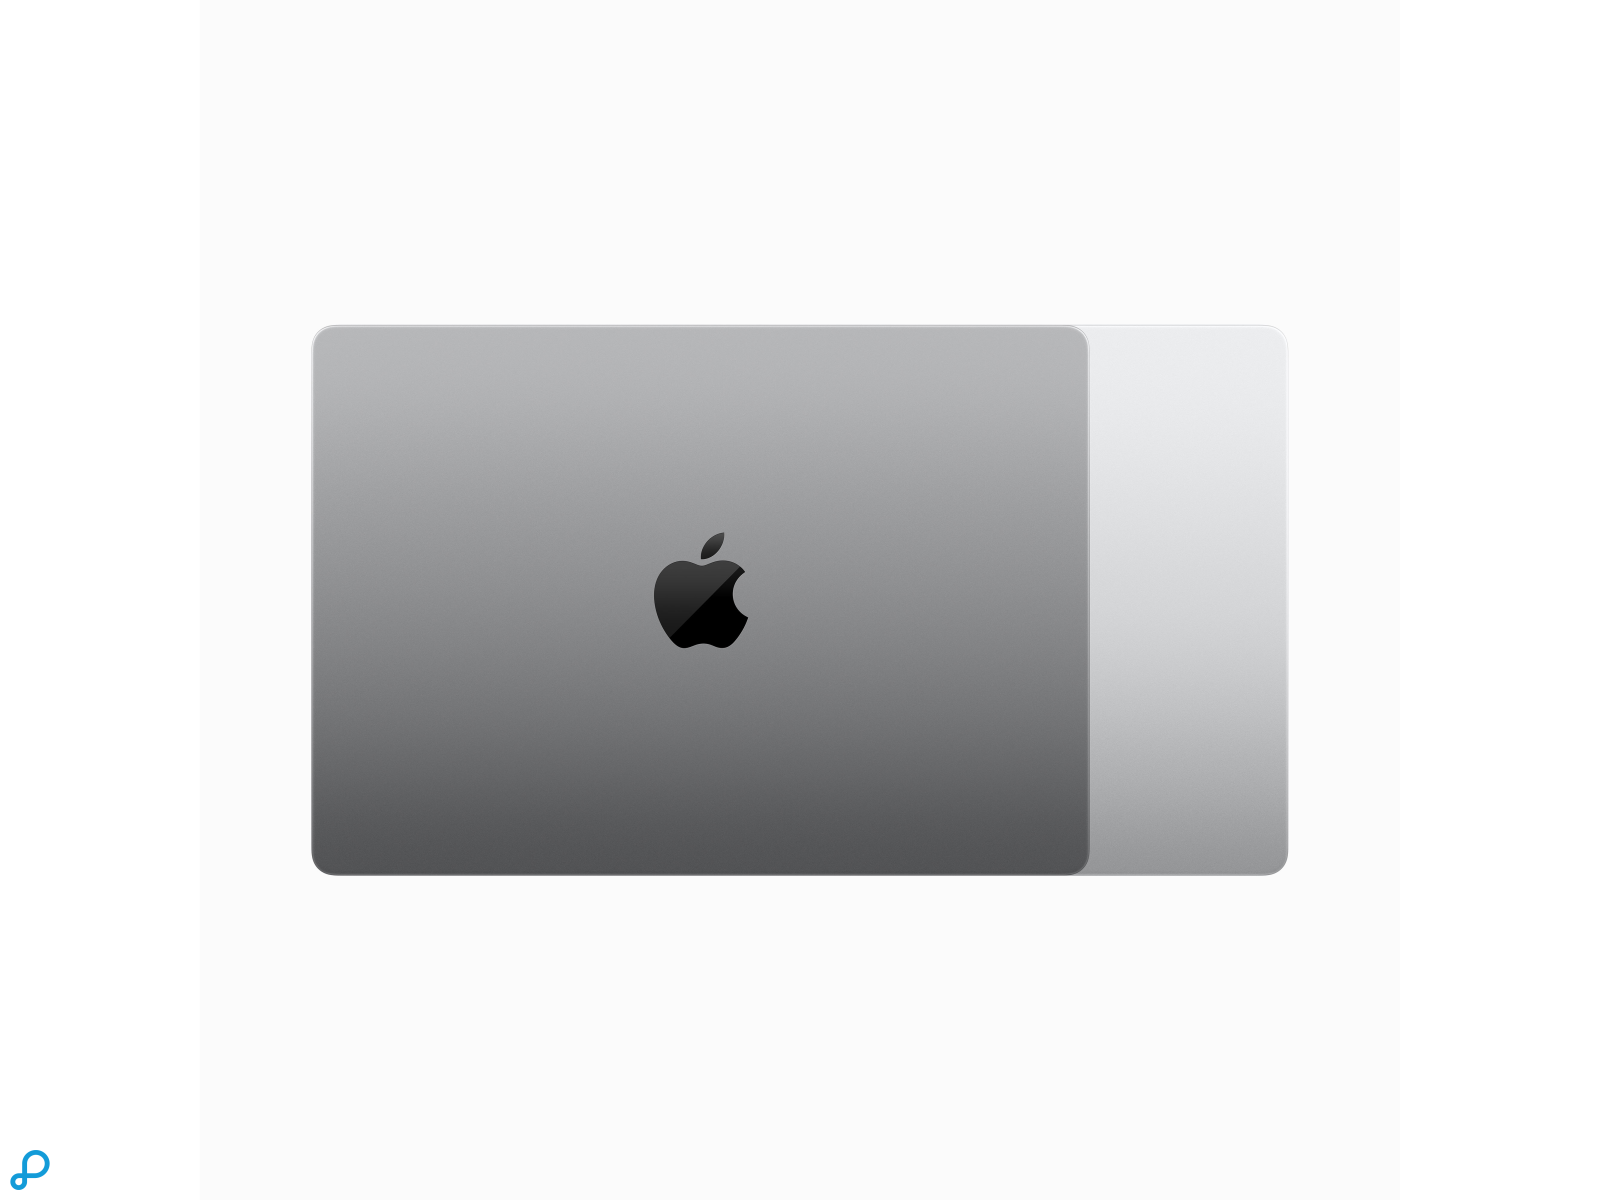 14-inch MacBook Pro: Apple M3 chip with 8-core CPU and 10-core GPU, 512GB SSD - Space Grey-6